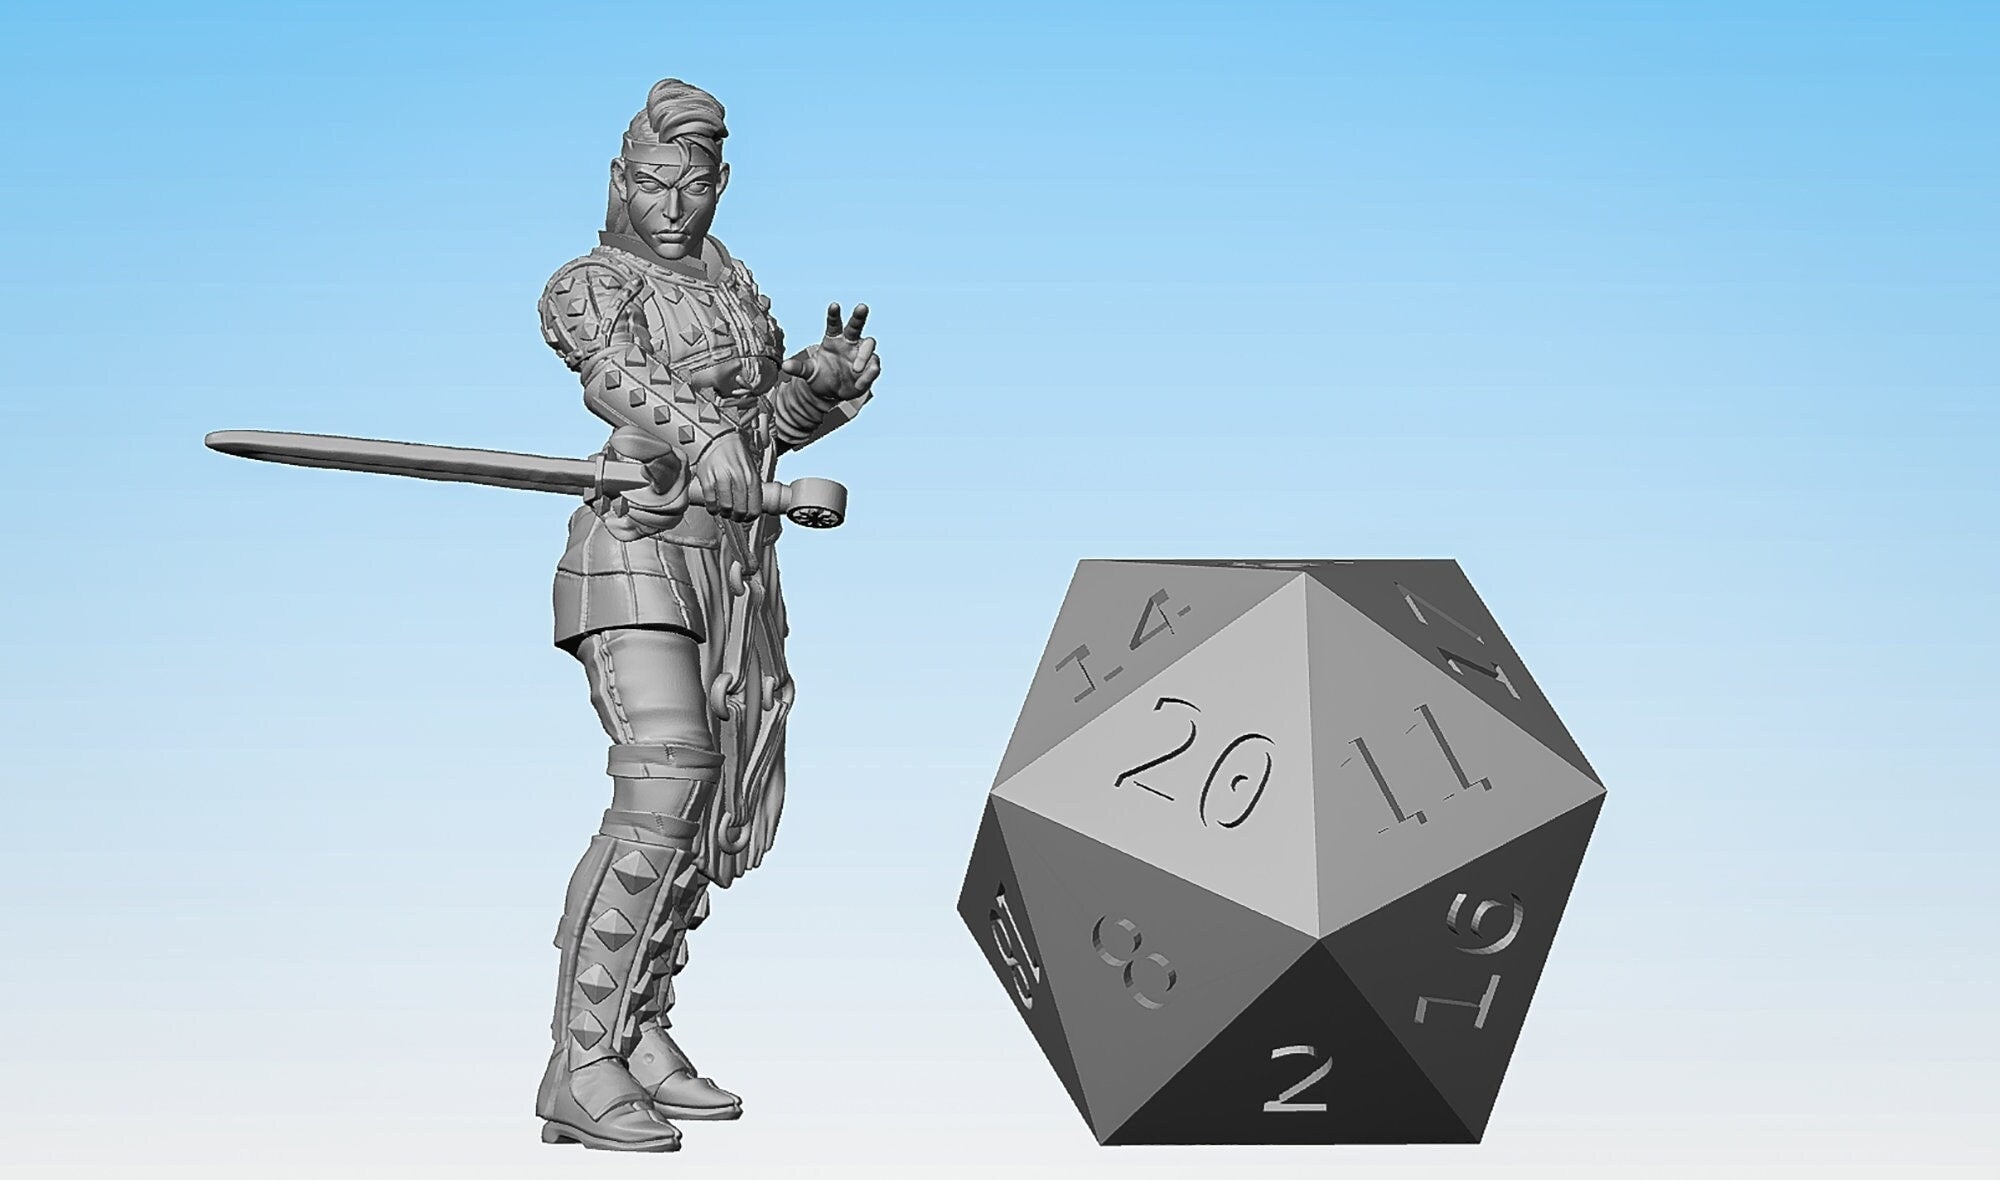 WITCH HUNTER (F) (Witcher) "Blade & Spell" | Dungeons and Dragons | DnD | Pathfinder | Tabletop | RPG | Hero Size | 28 mm-Role Playing Miniatures